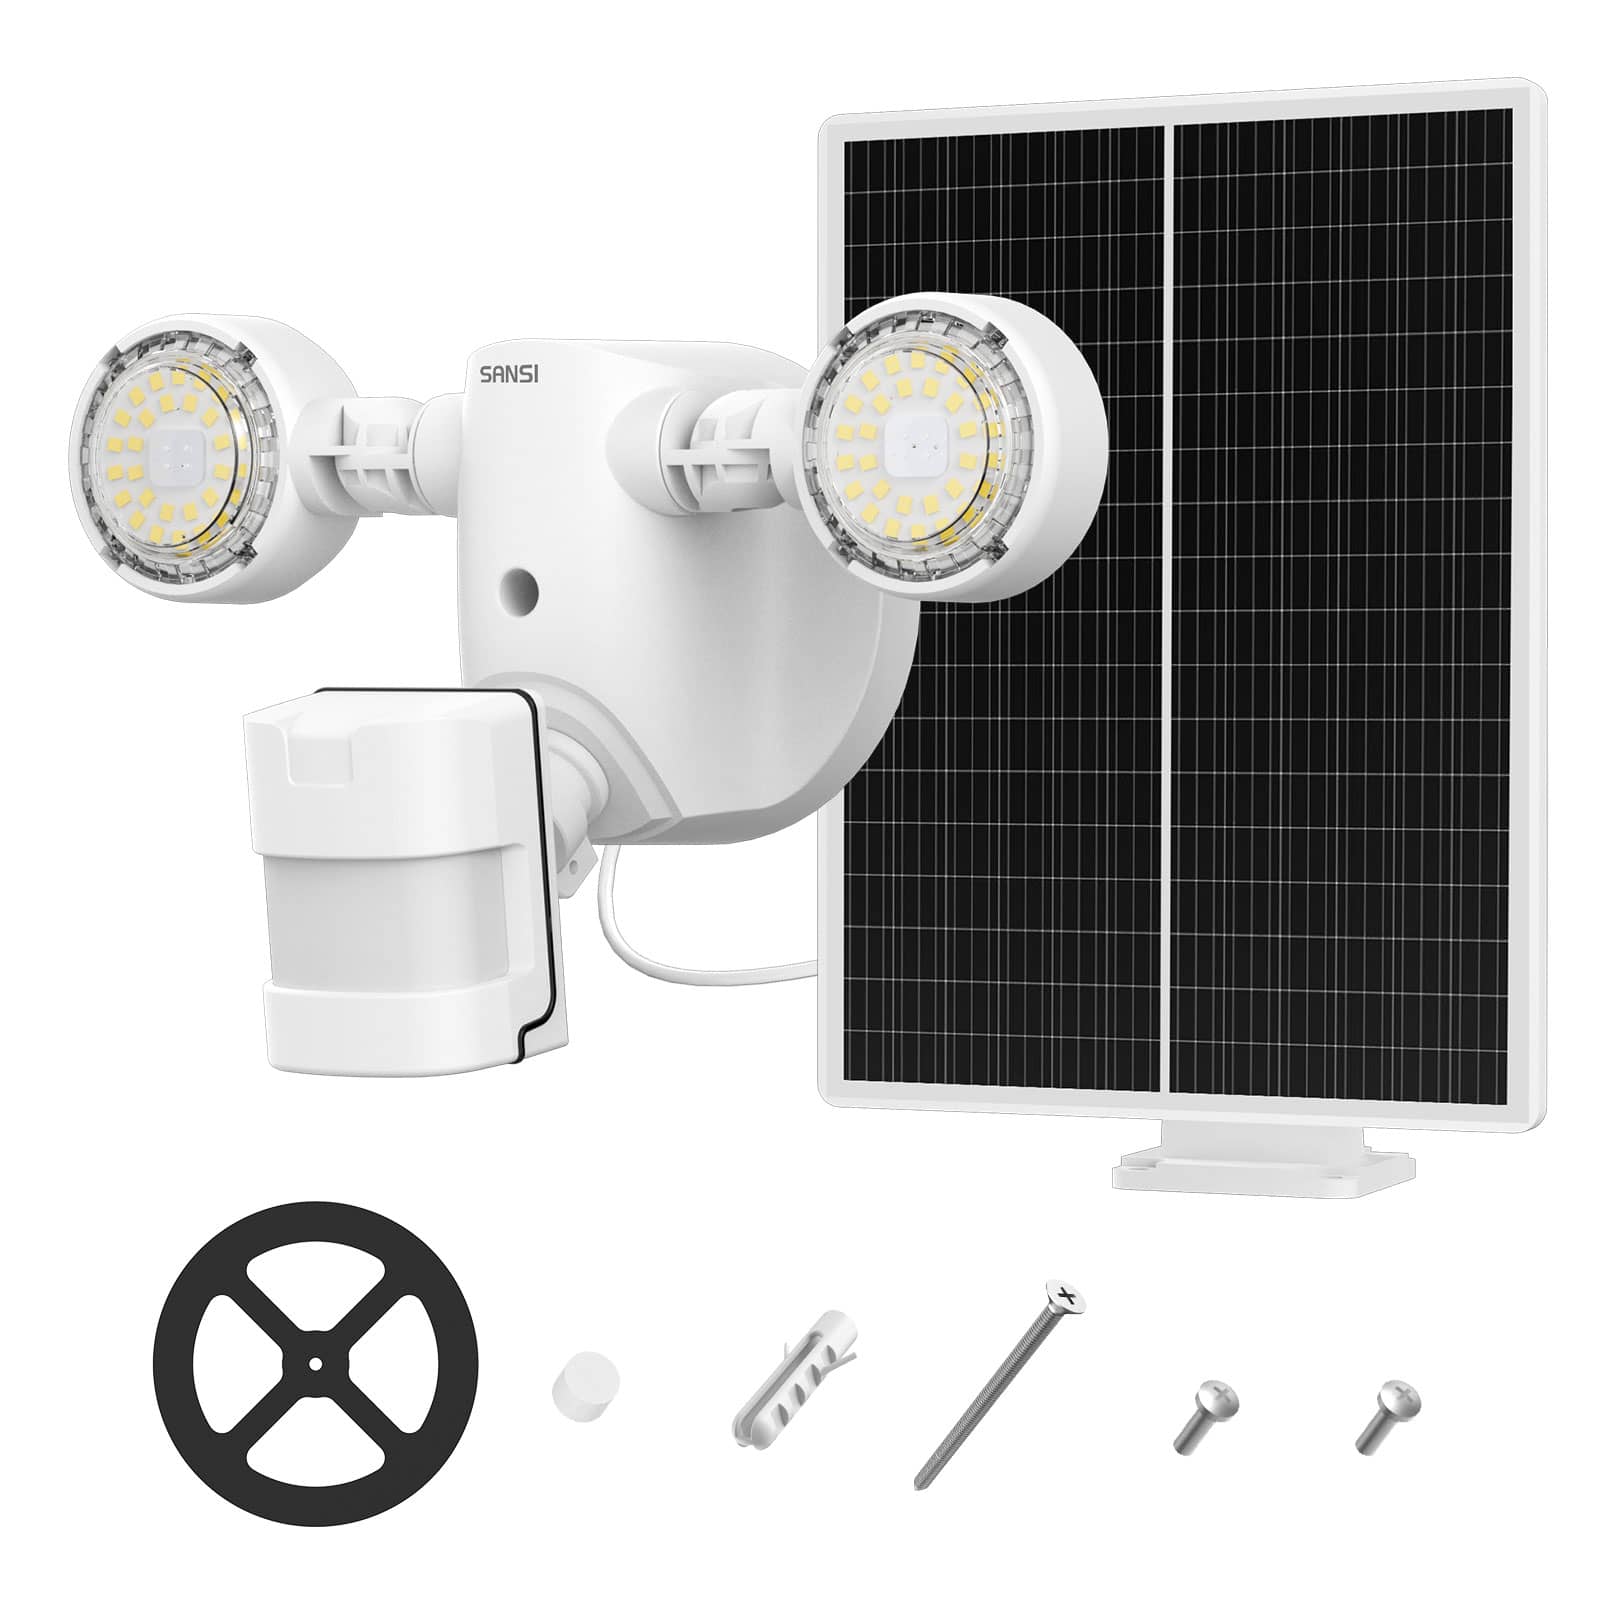 3.5W Outdoor Solar Security Light (Motion Sensor)(US ONLY)